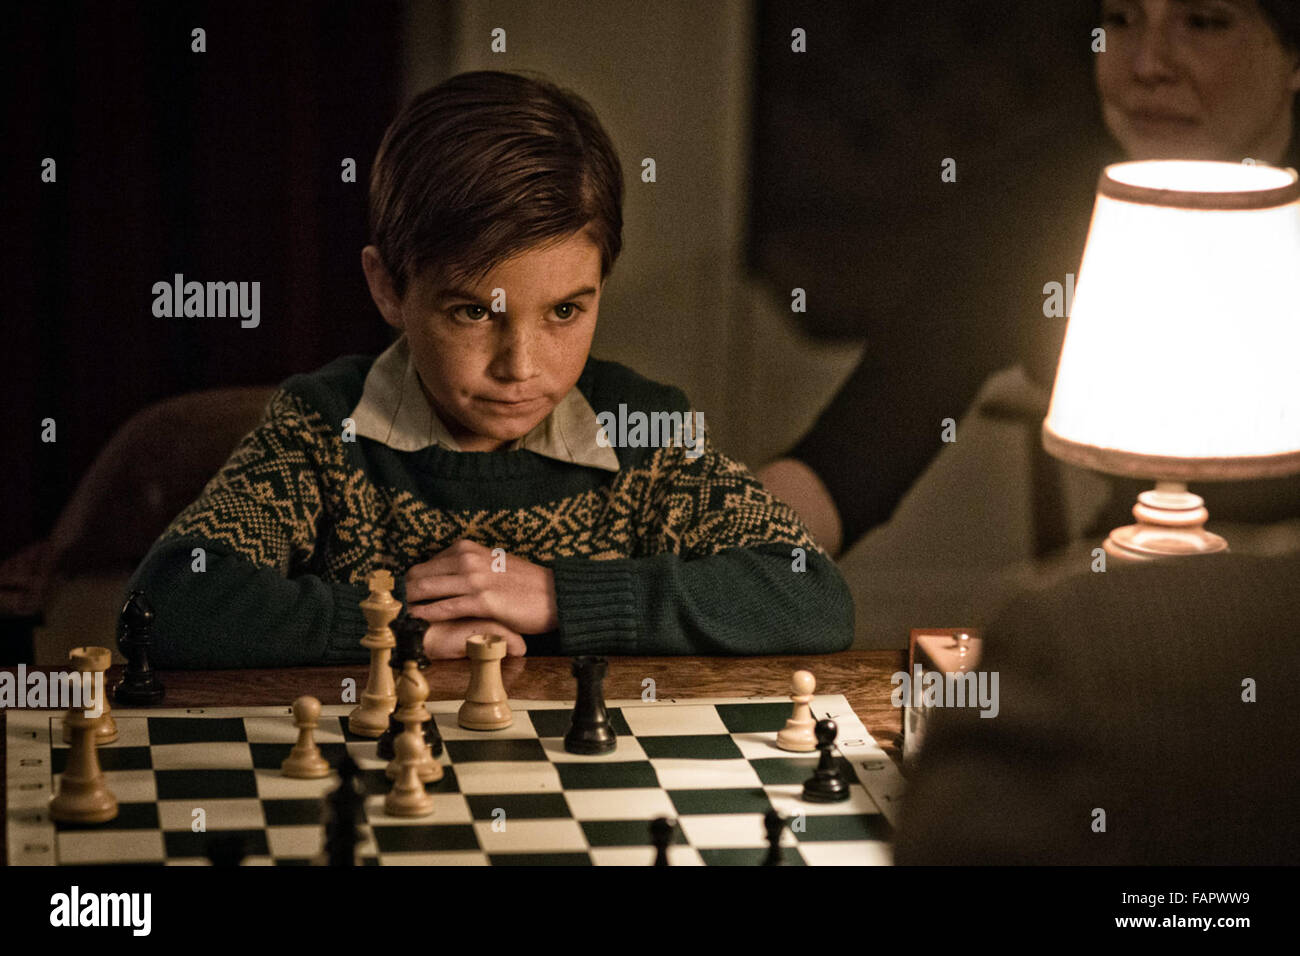 Pawn Sacrifice: Cold War chess film timelier than ever - The Globe